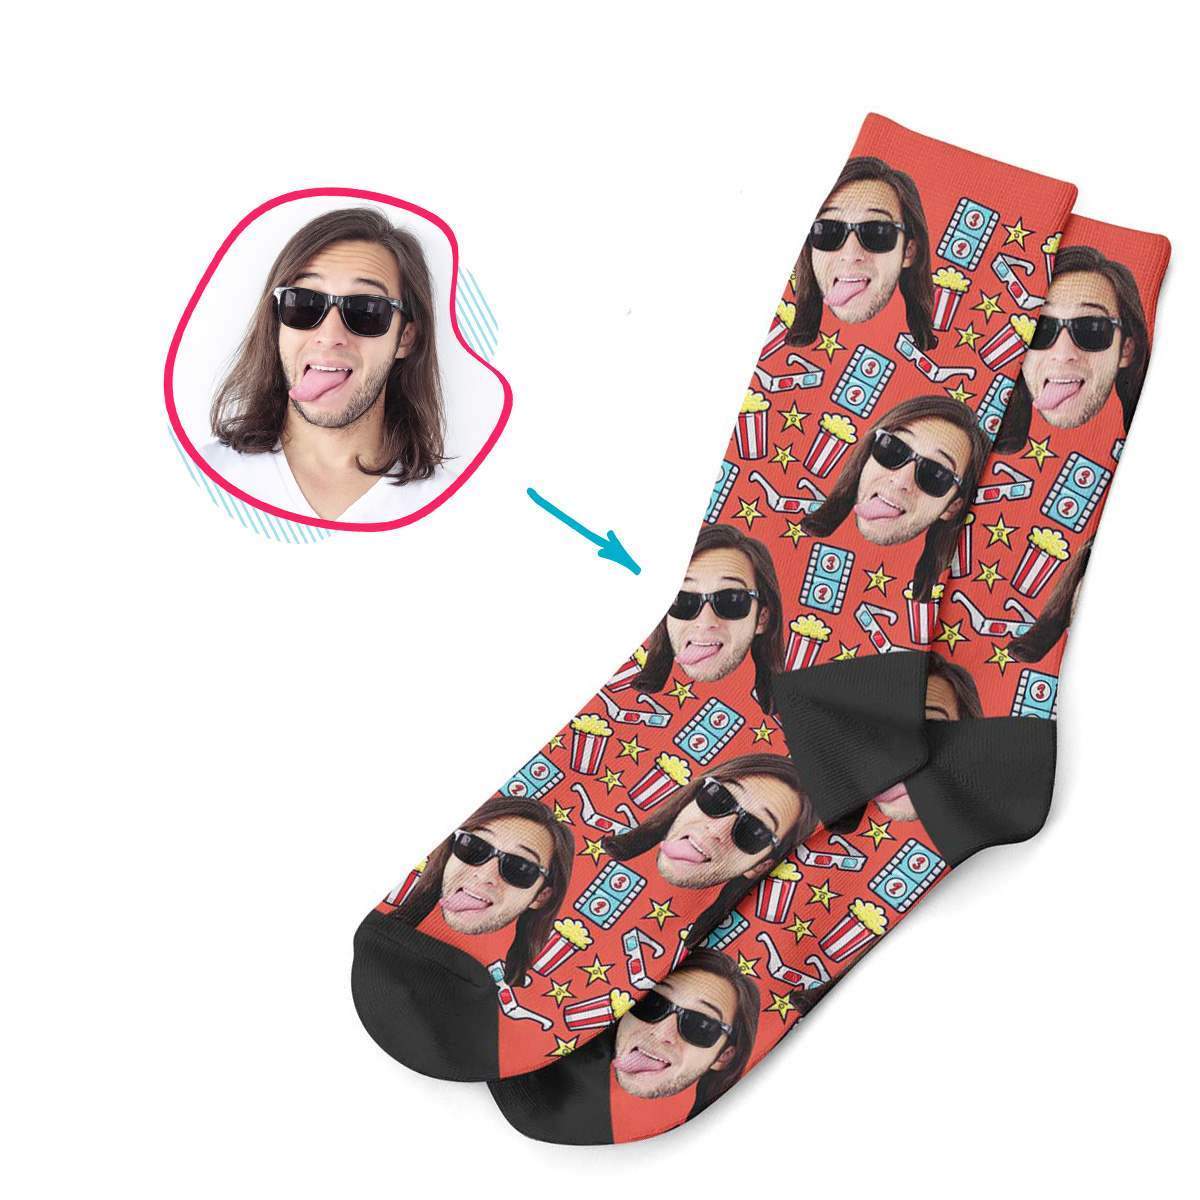 red Movie socks personalized with photo of face printed on them